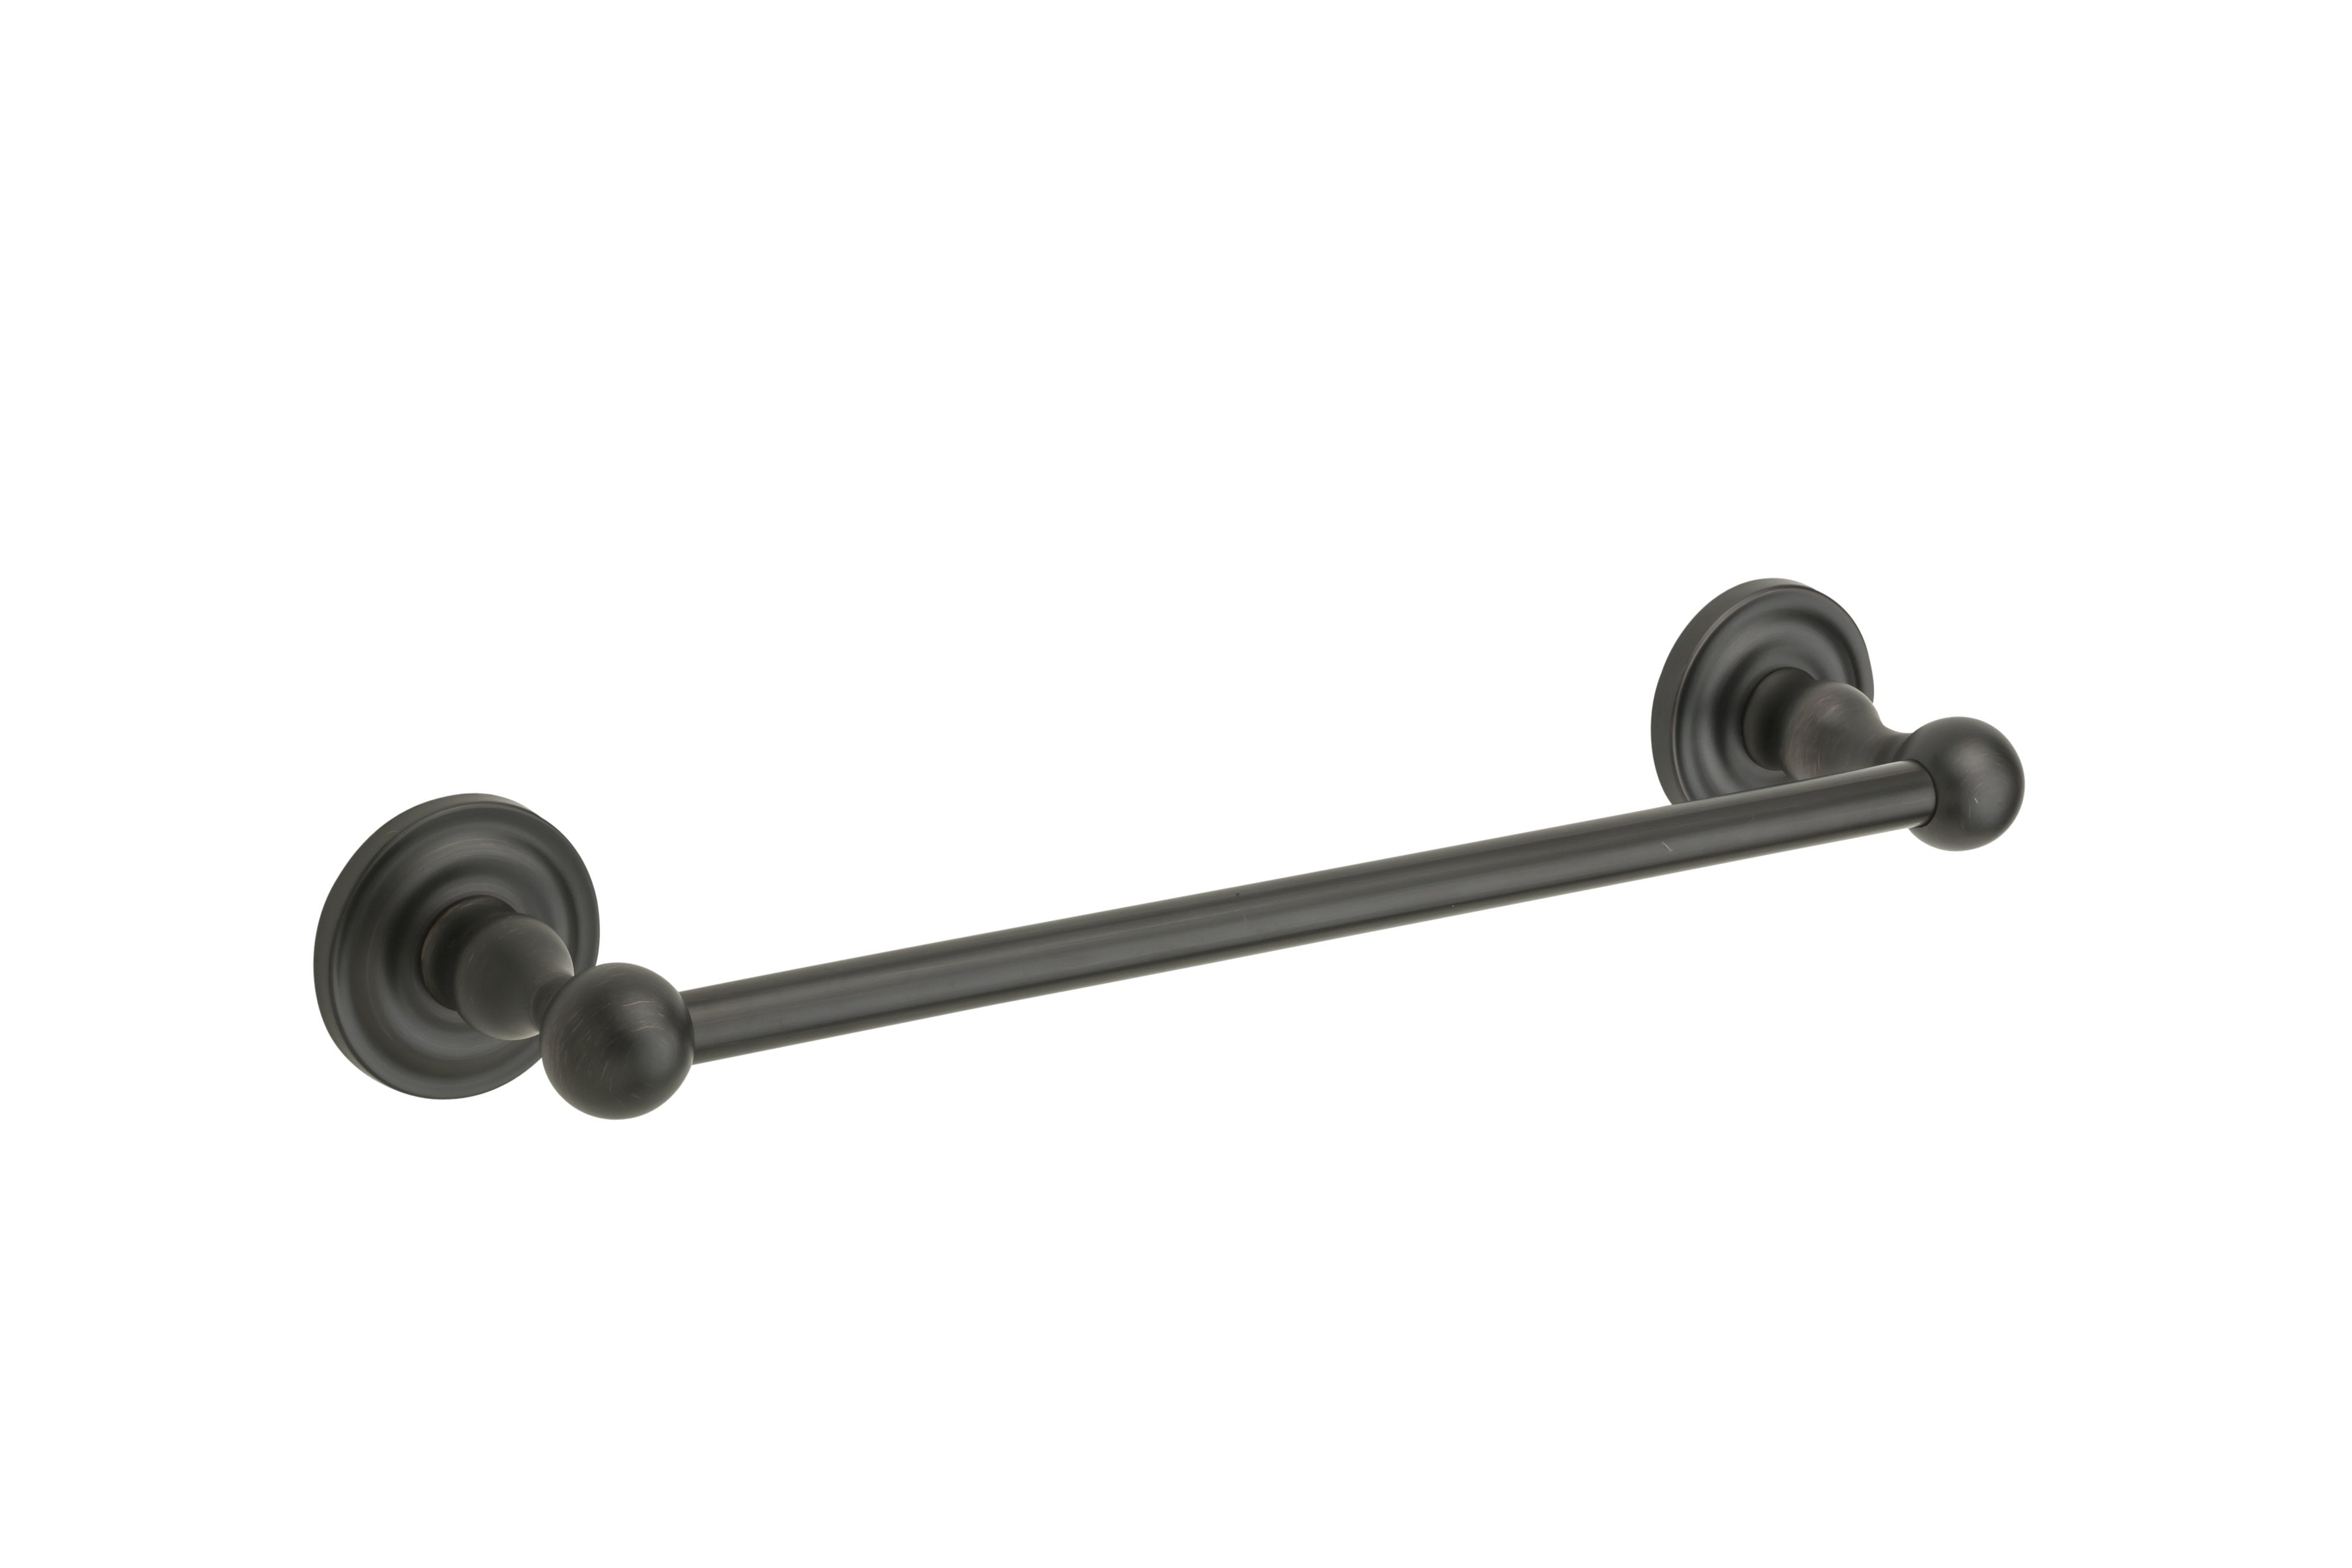 French Country Style Towel Bar TBAR18 R1 Series by Montana Forge